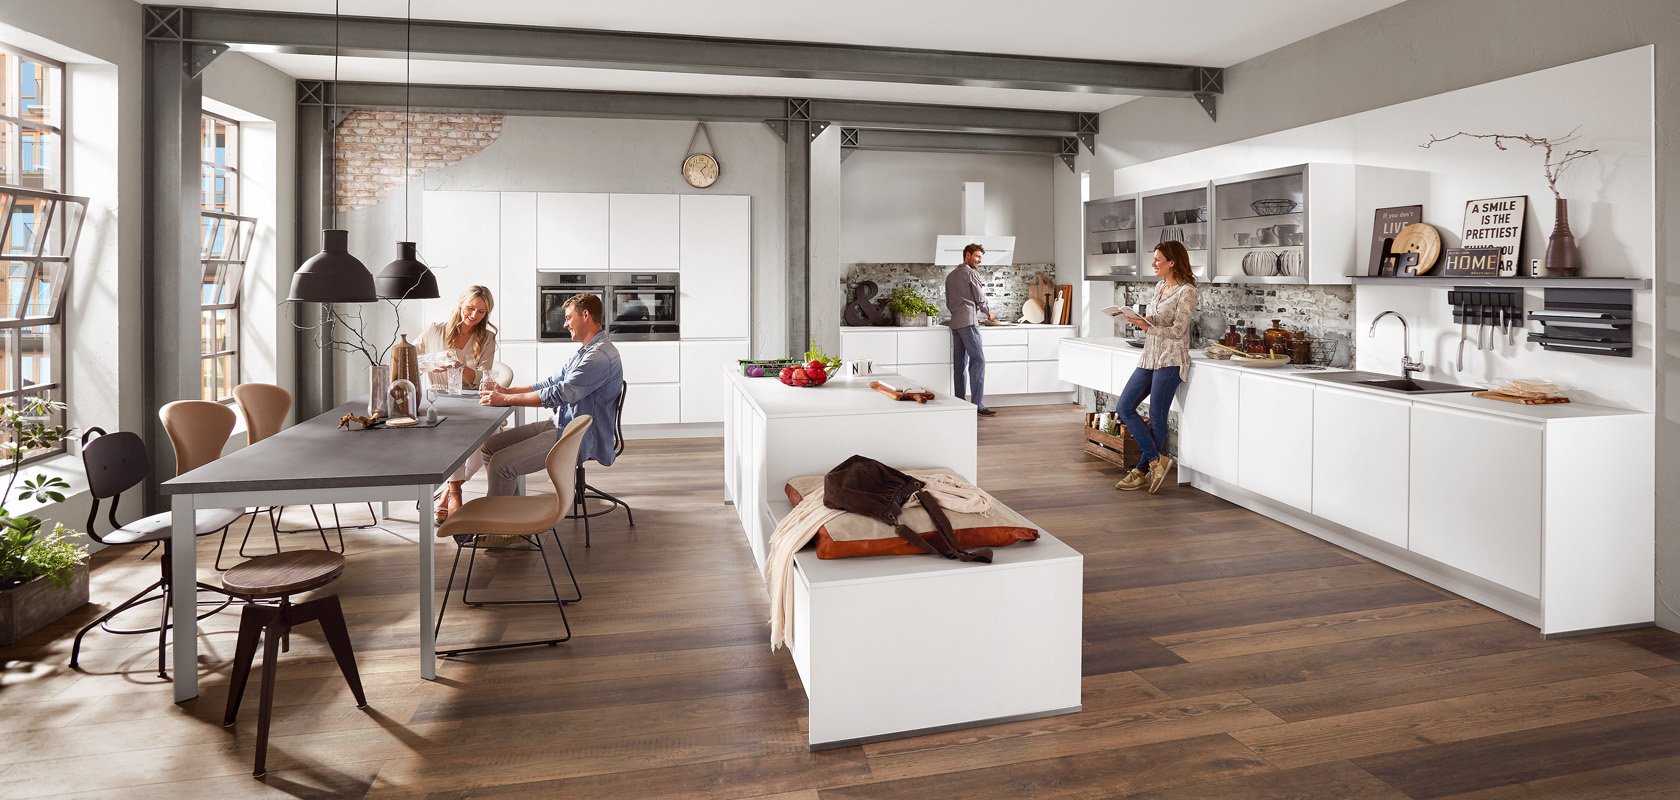 Spacious modern kitchen with a dining area showcasing lively friends enjoying a meal, with natural light enhancing the contemporary interior design.